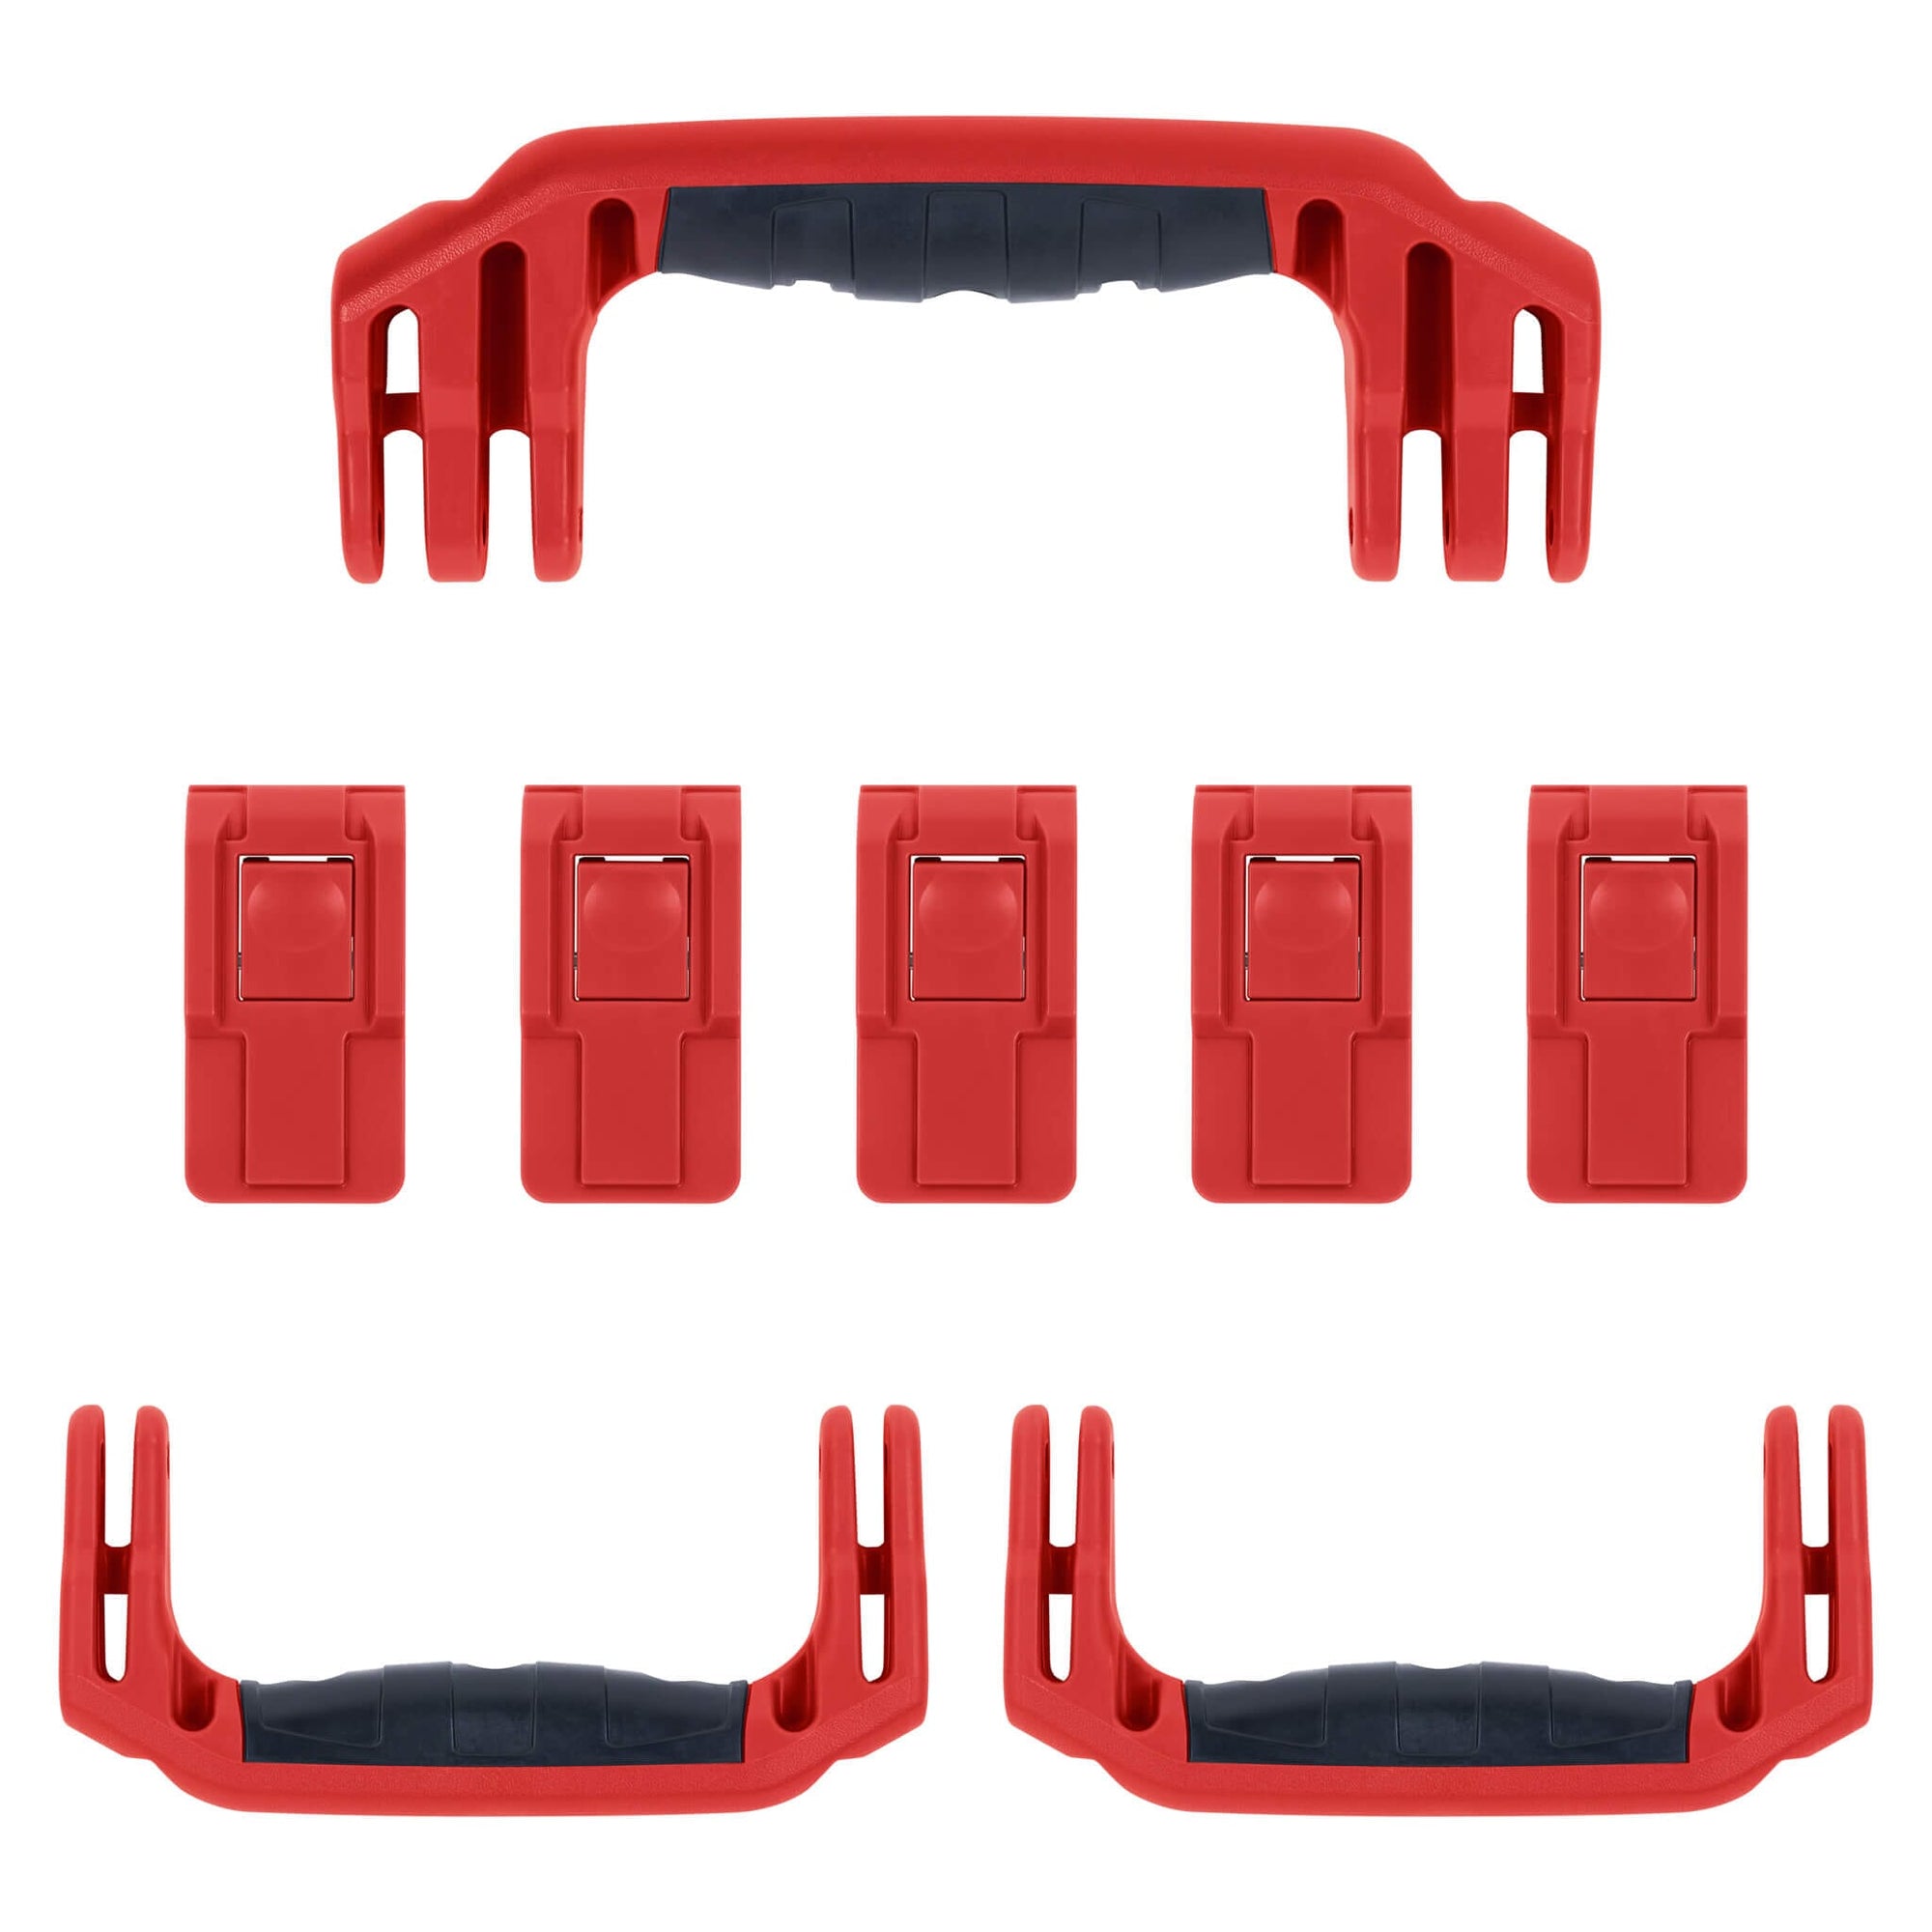 Pelican 1637 Air Replacement Handles & Latches, Red (Set of 3 Handles, 5 Latches) ColorCase 